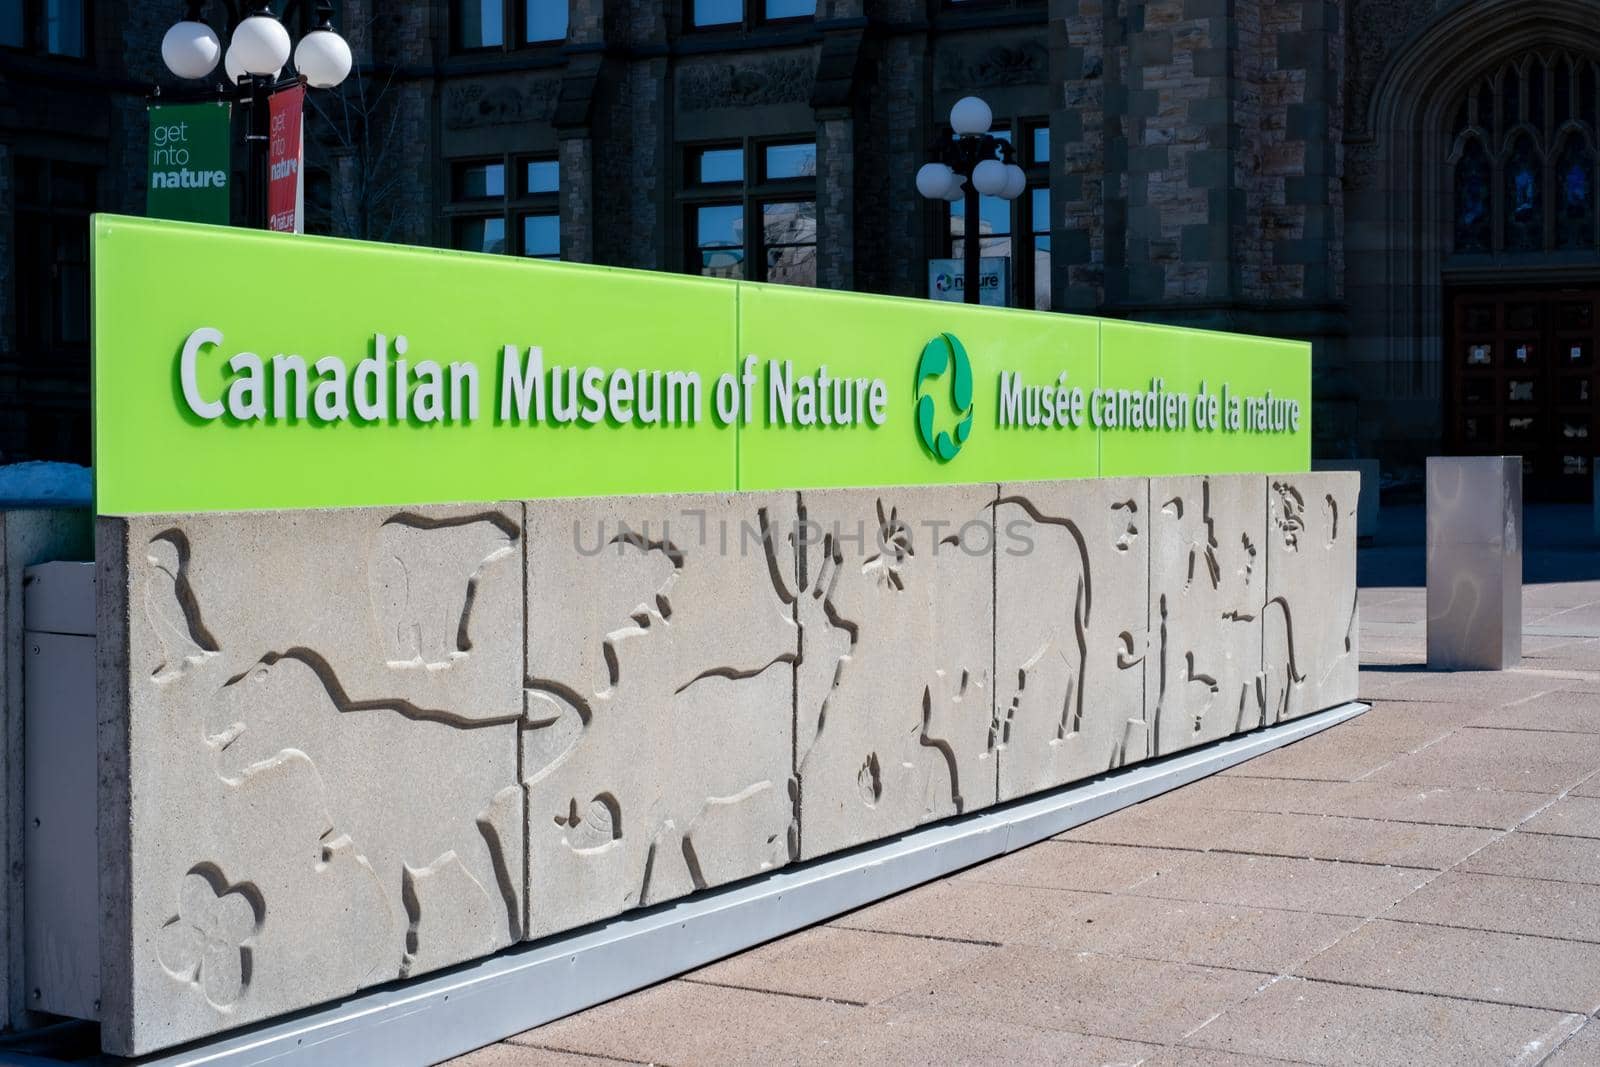 Ottawa, Ontario, Canada - March 20, 2021: The sign at the entrance to the Canadian Museum of Nature.